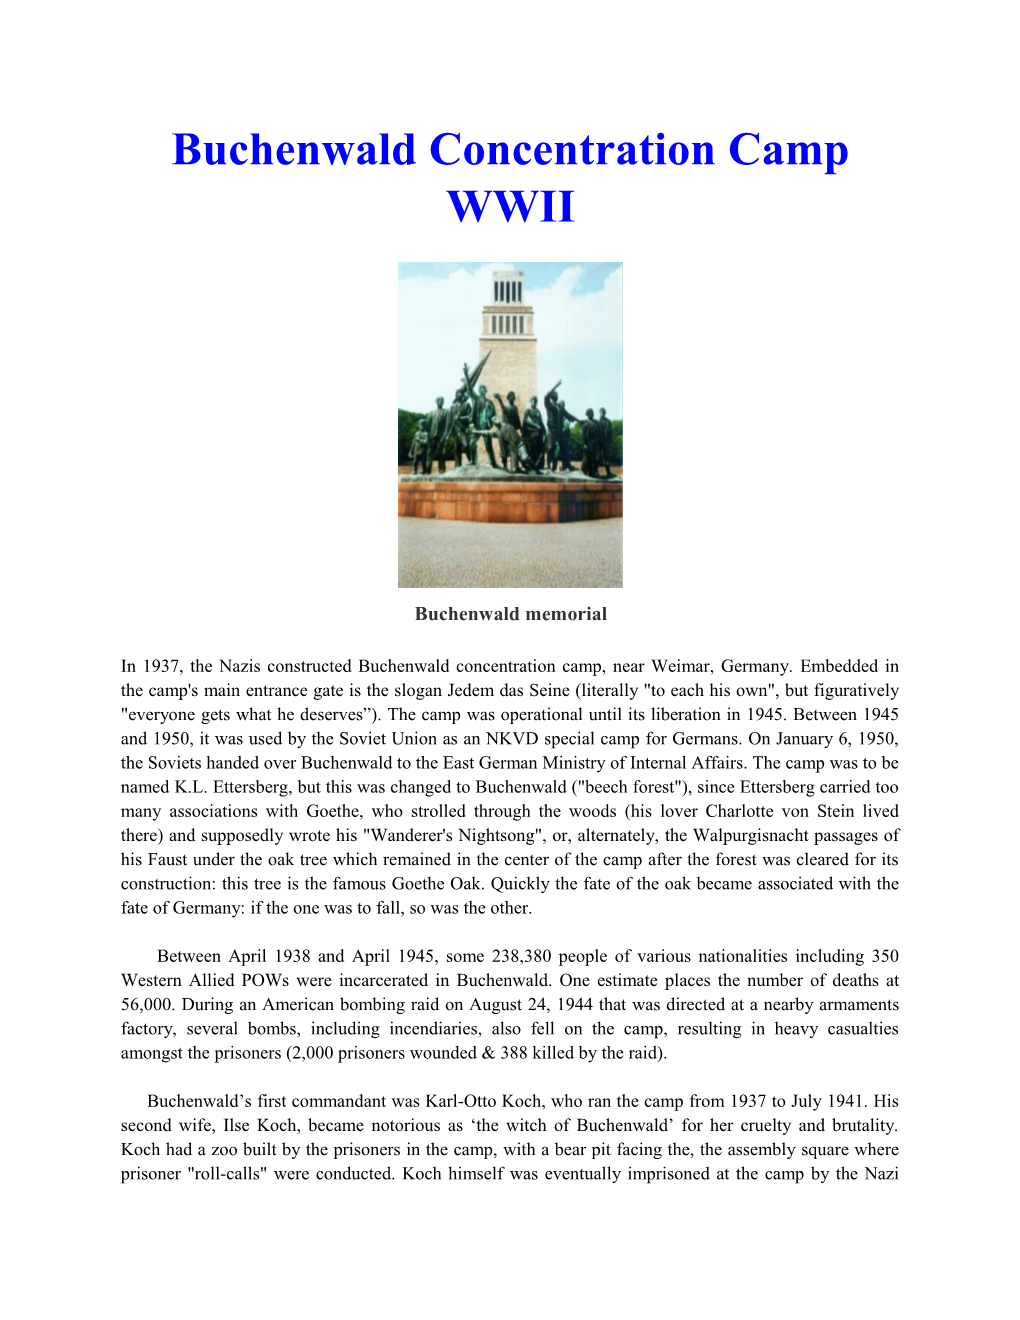 Buchenwald Concentration Camp WWII